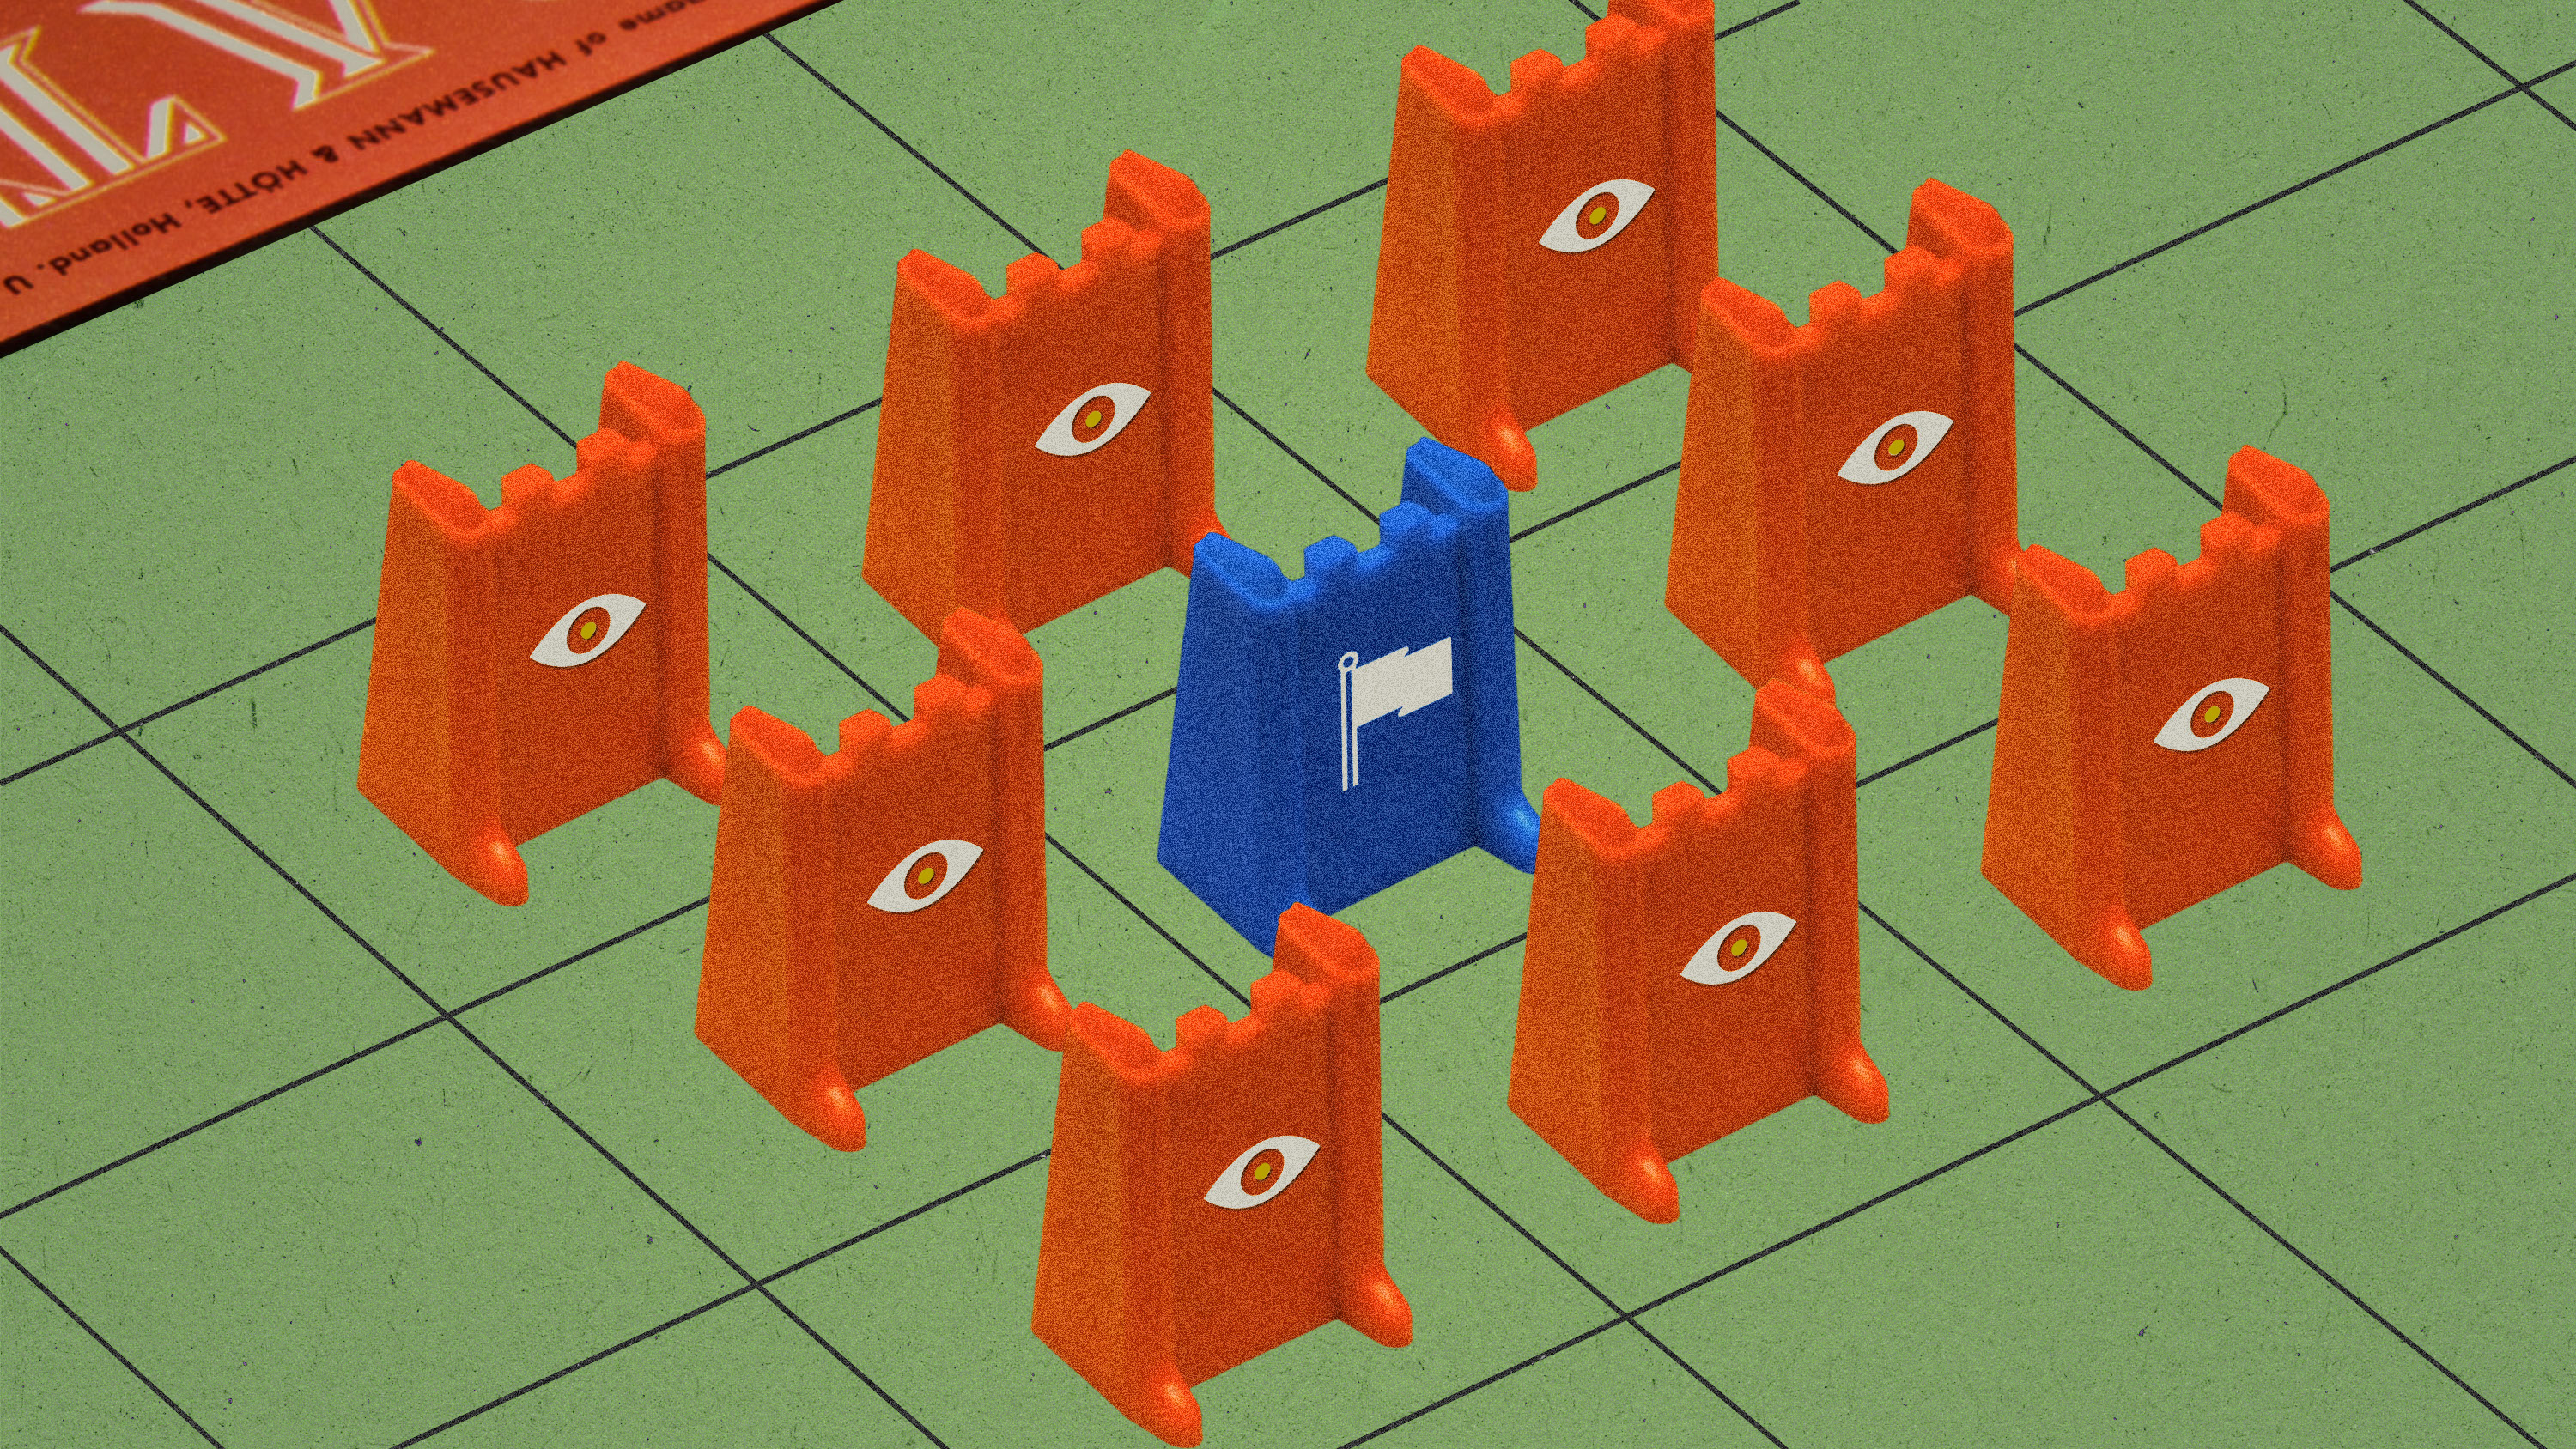 a section of a Stratego board where red pieces with an eye symbol have surrounded a single blue piece with a white flag